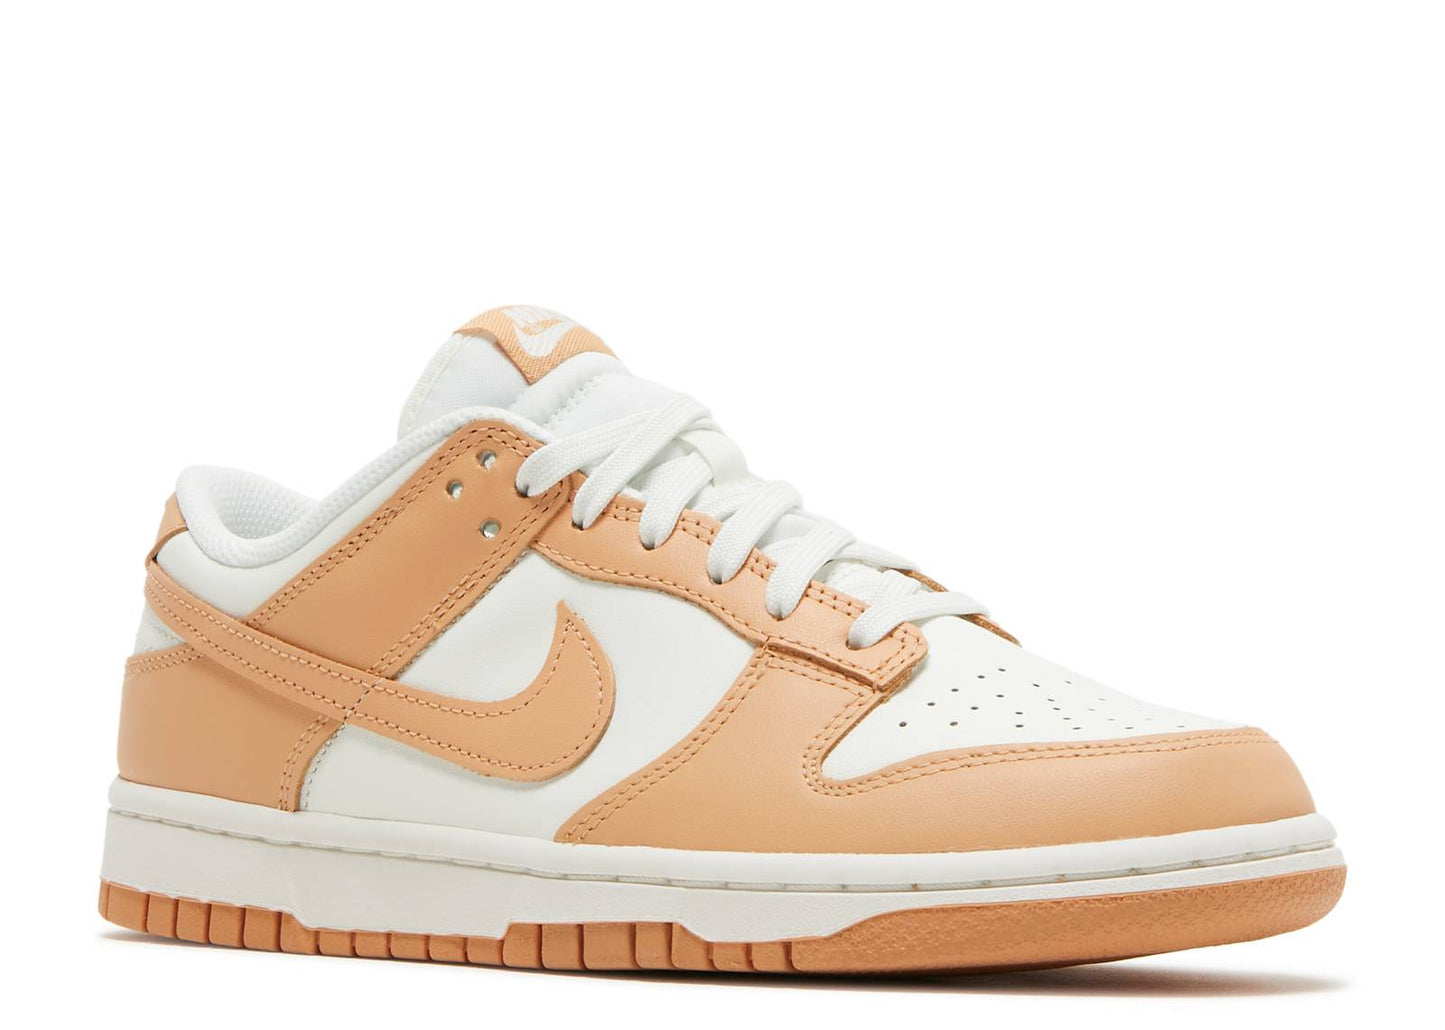 Nike Dunk Low WMNS "Harvest Moon"